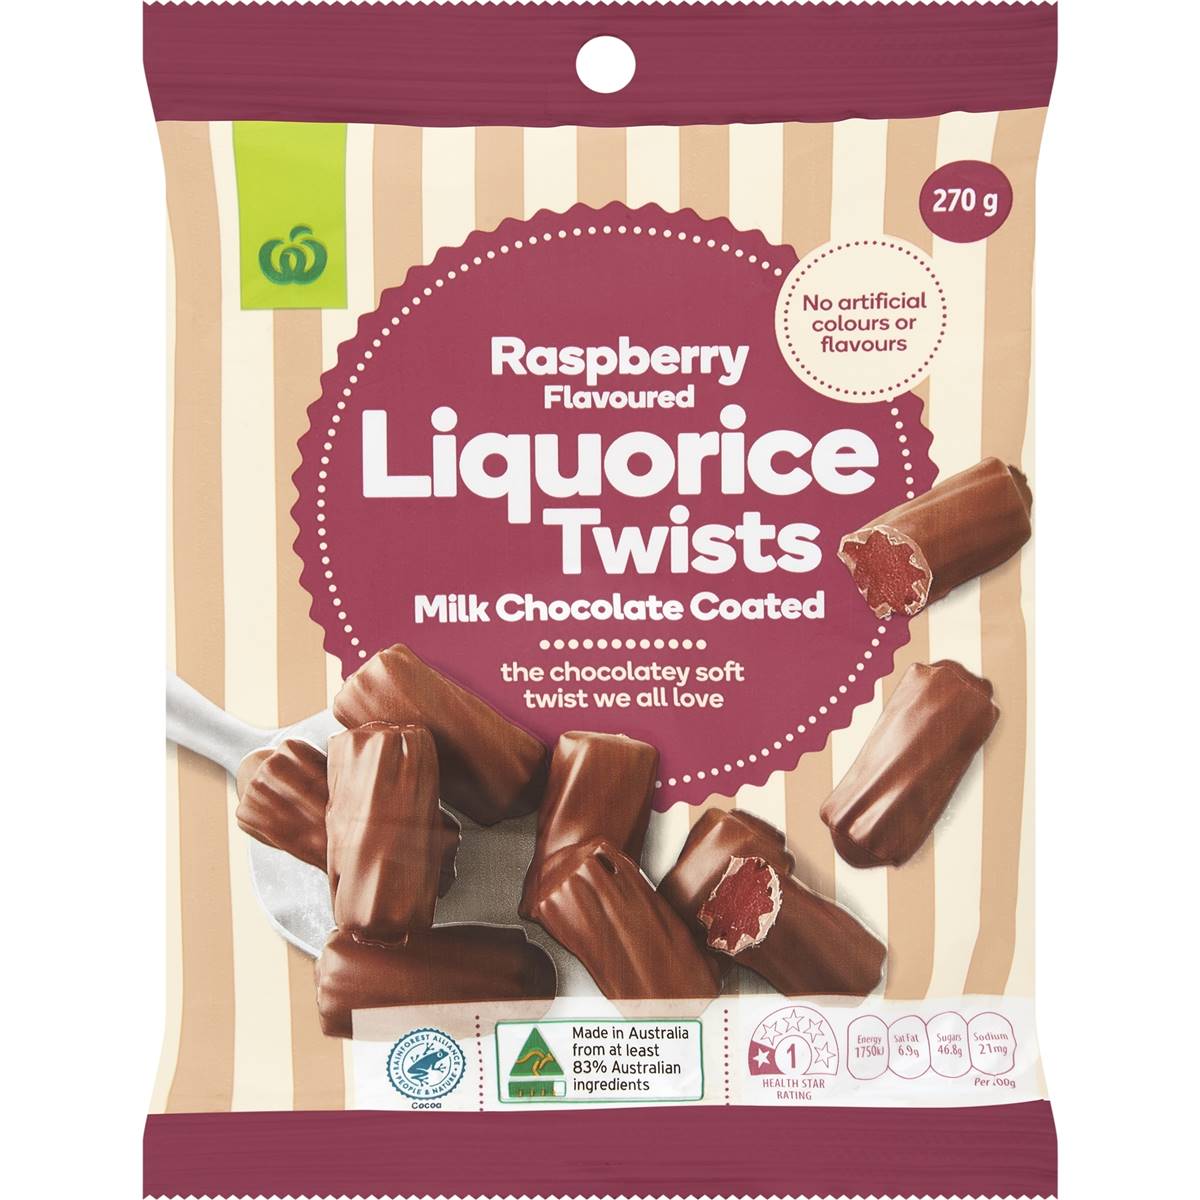 Calories in Woolworths Raspberry Flavoured Liquorice Twists